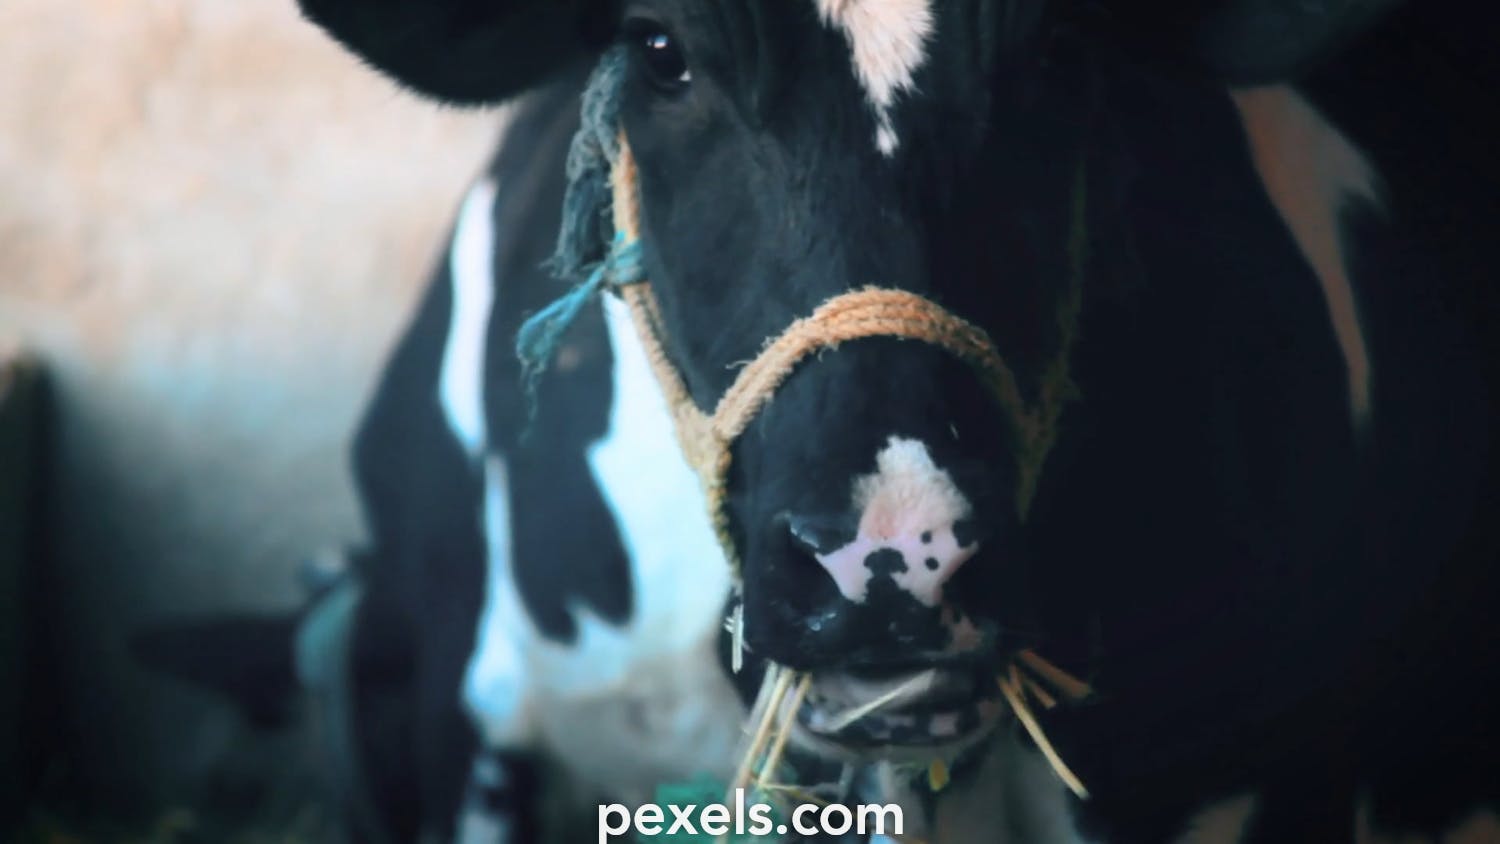 Xixe Video Ngpali 3gp - Cow Videos, Download The BEST Free 4k Stock Video Footage & Cow HD Video  Clips